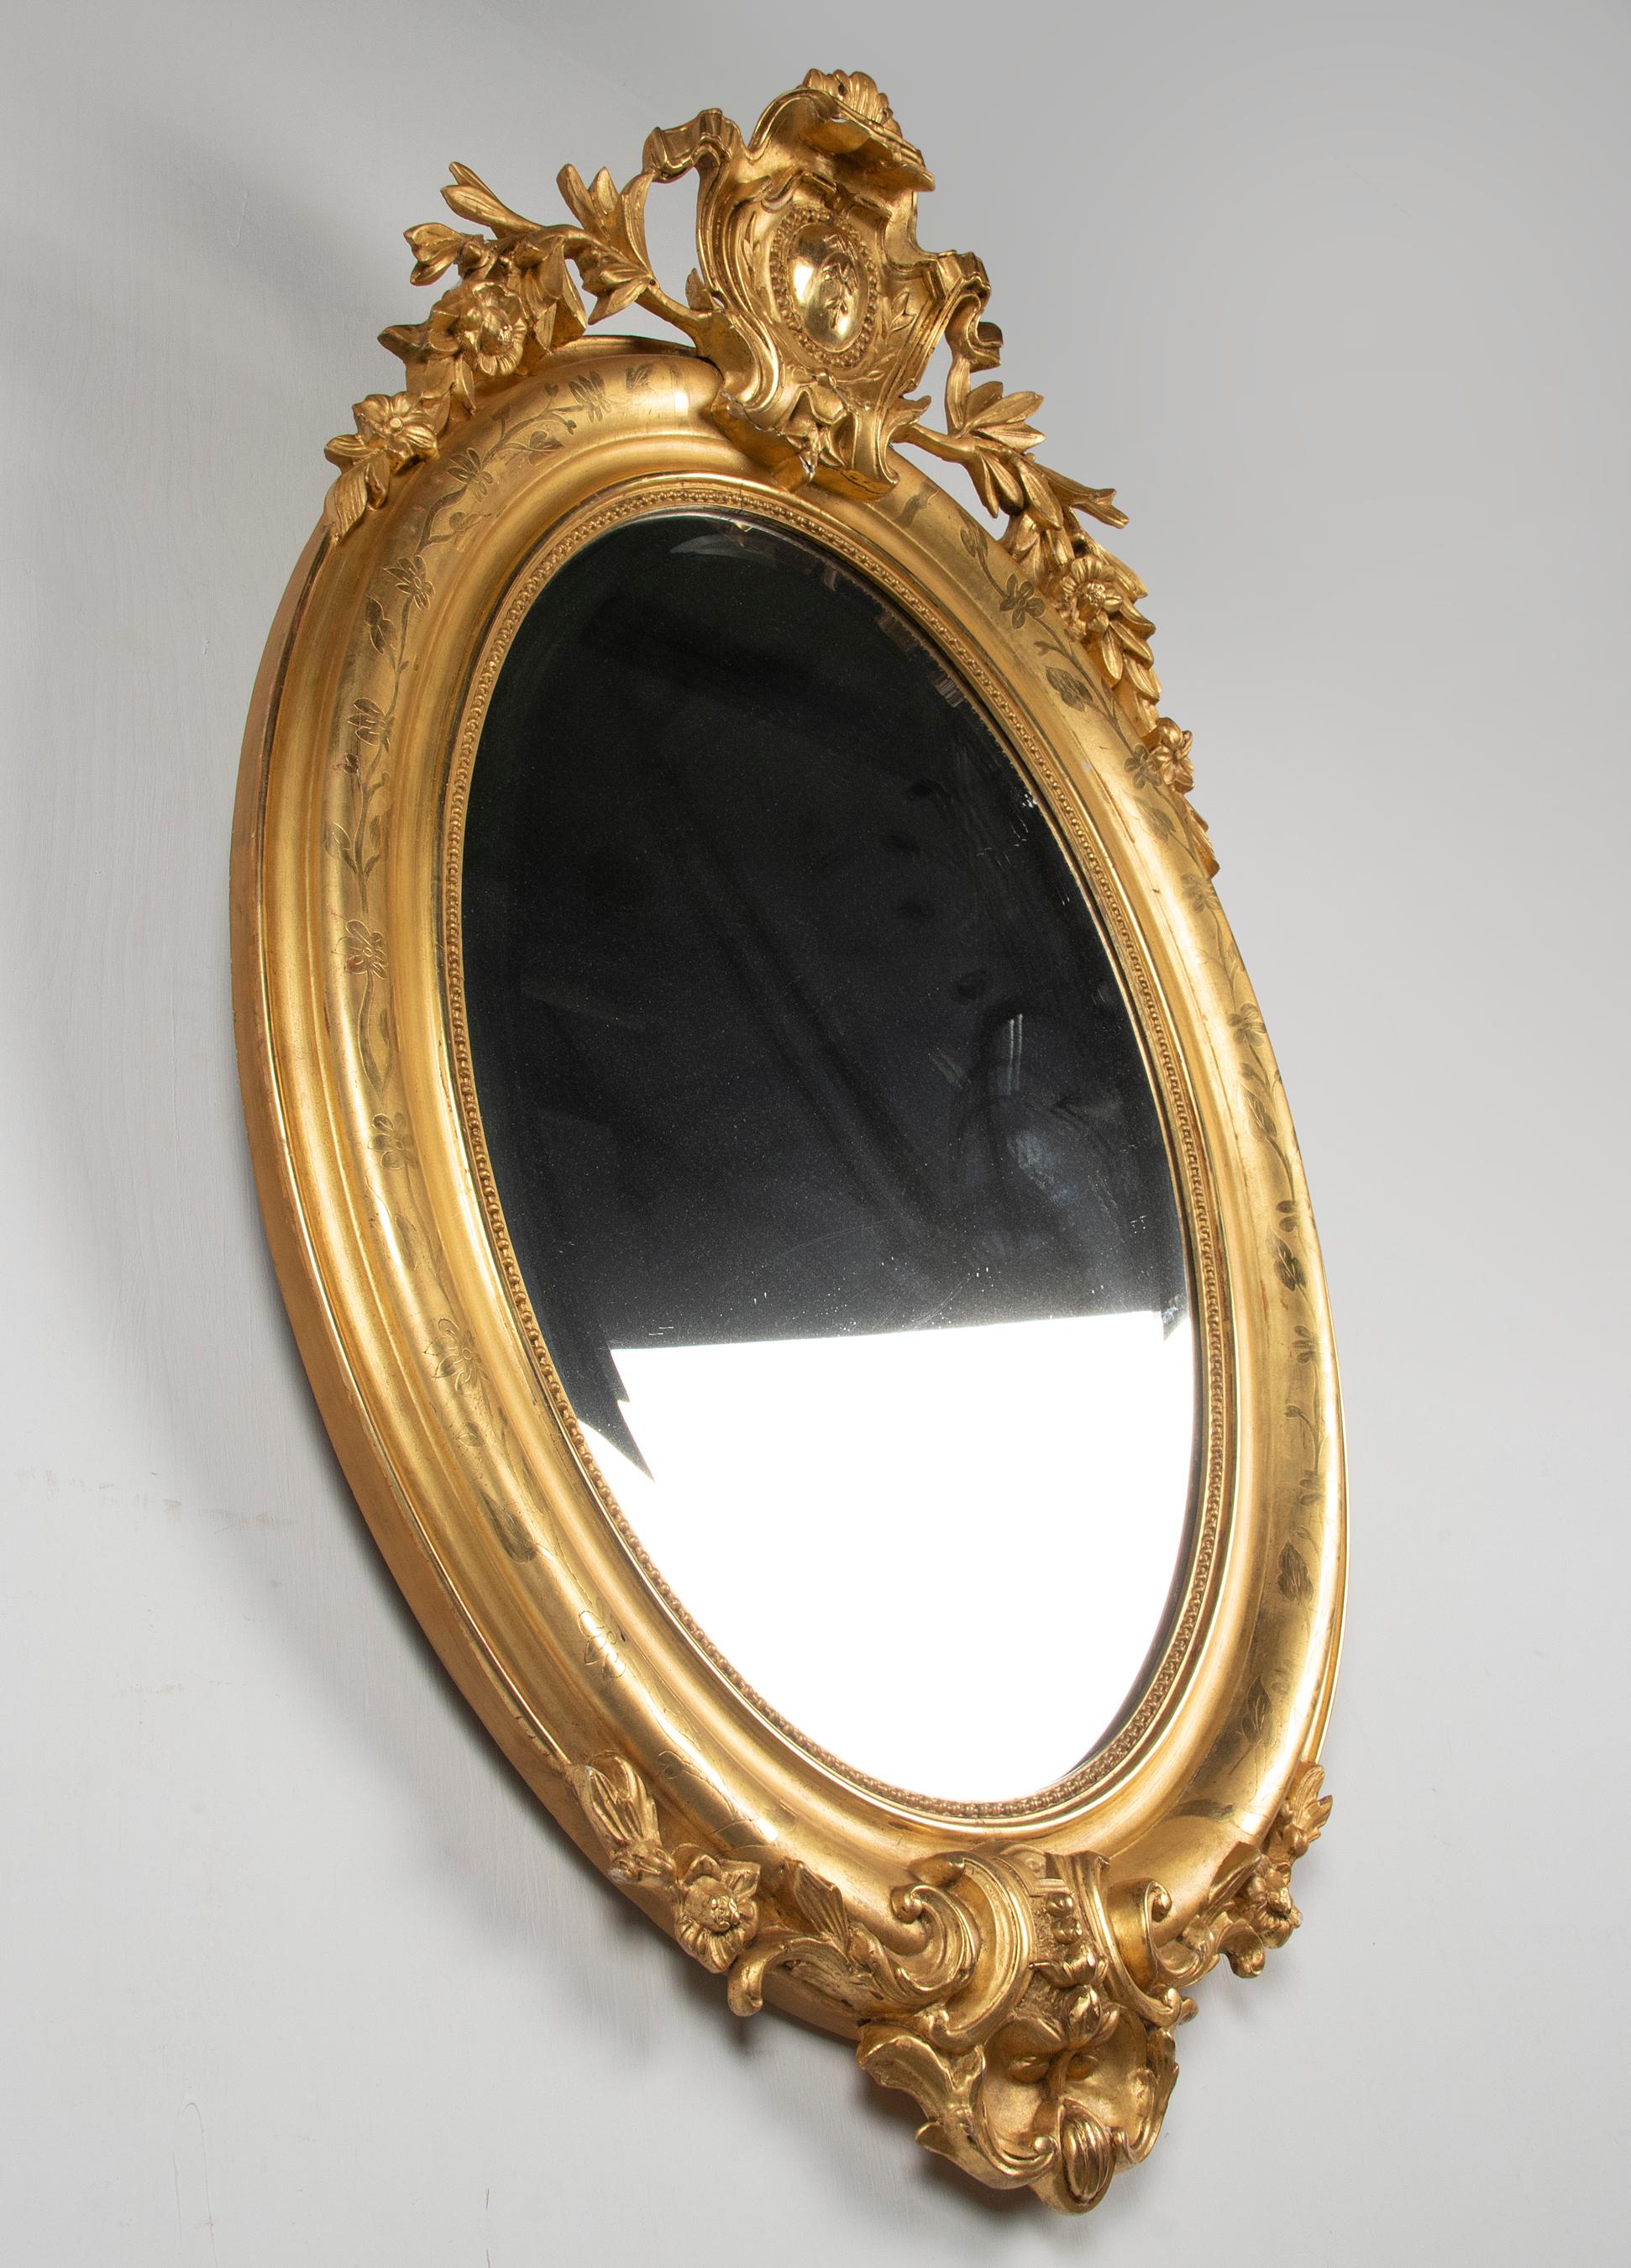 Antique French Napoleon III Gold Leaf Oval Mirror 1